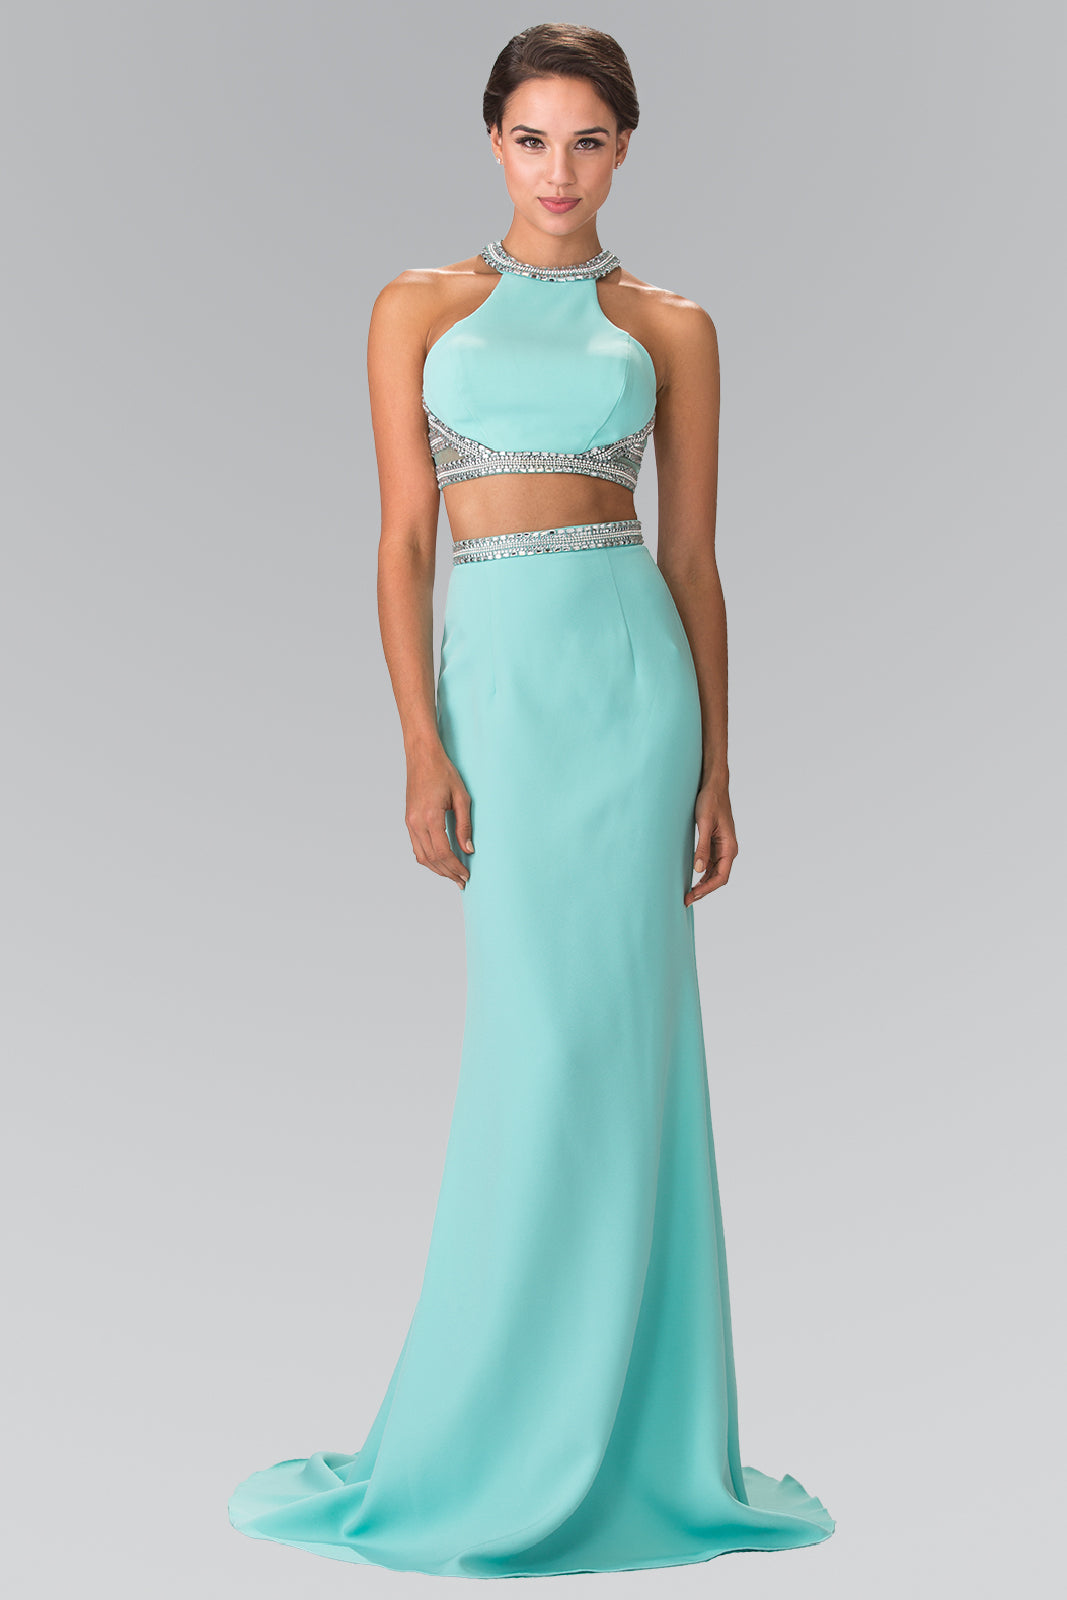 High Neck Two-Piece Jersey Long Dress Accented with a Beaded Band Waistline GLGL2256 Elsy Style PROM